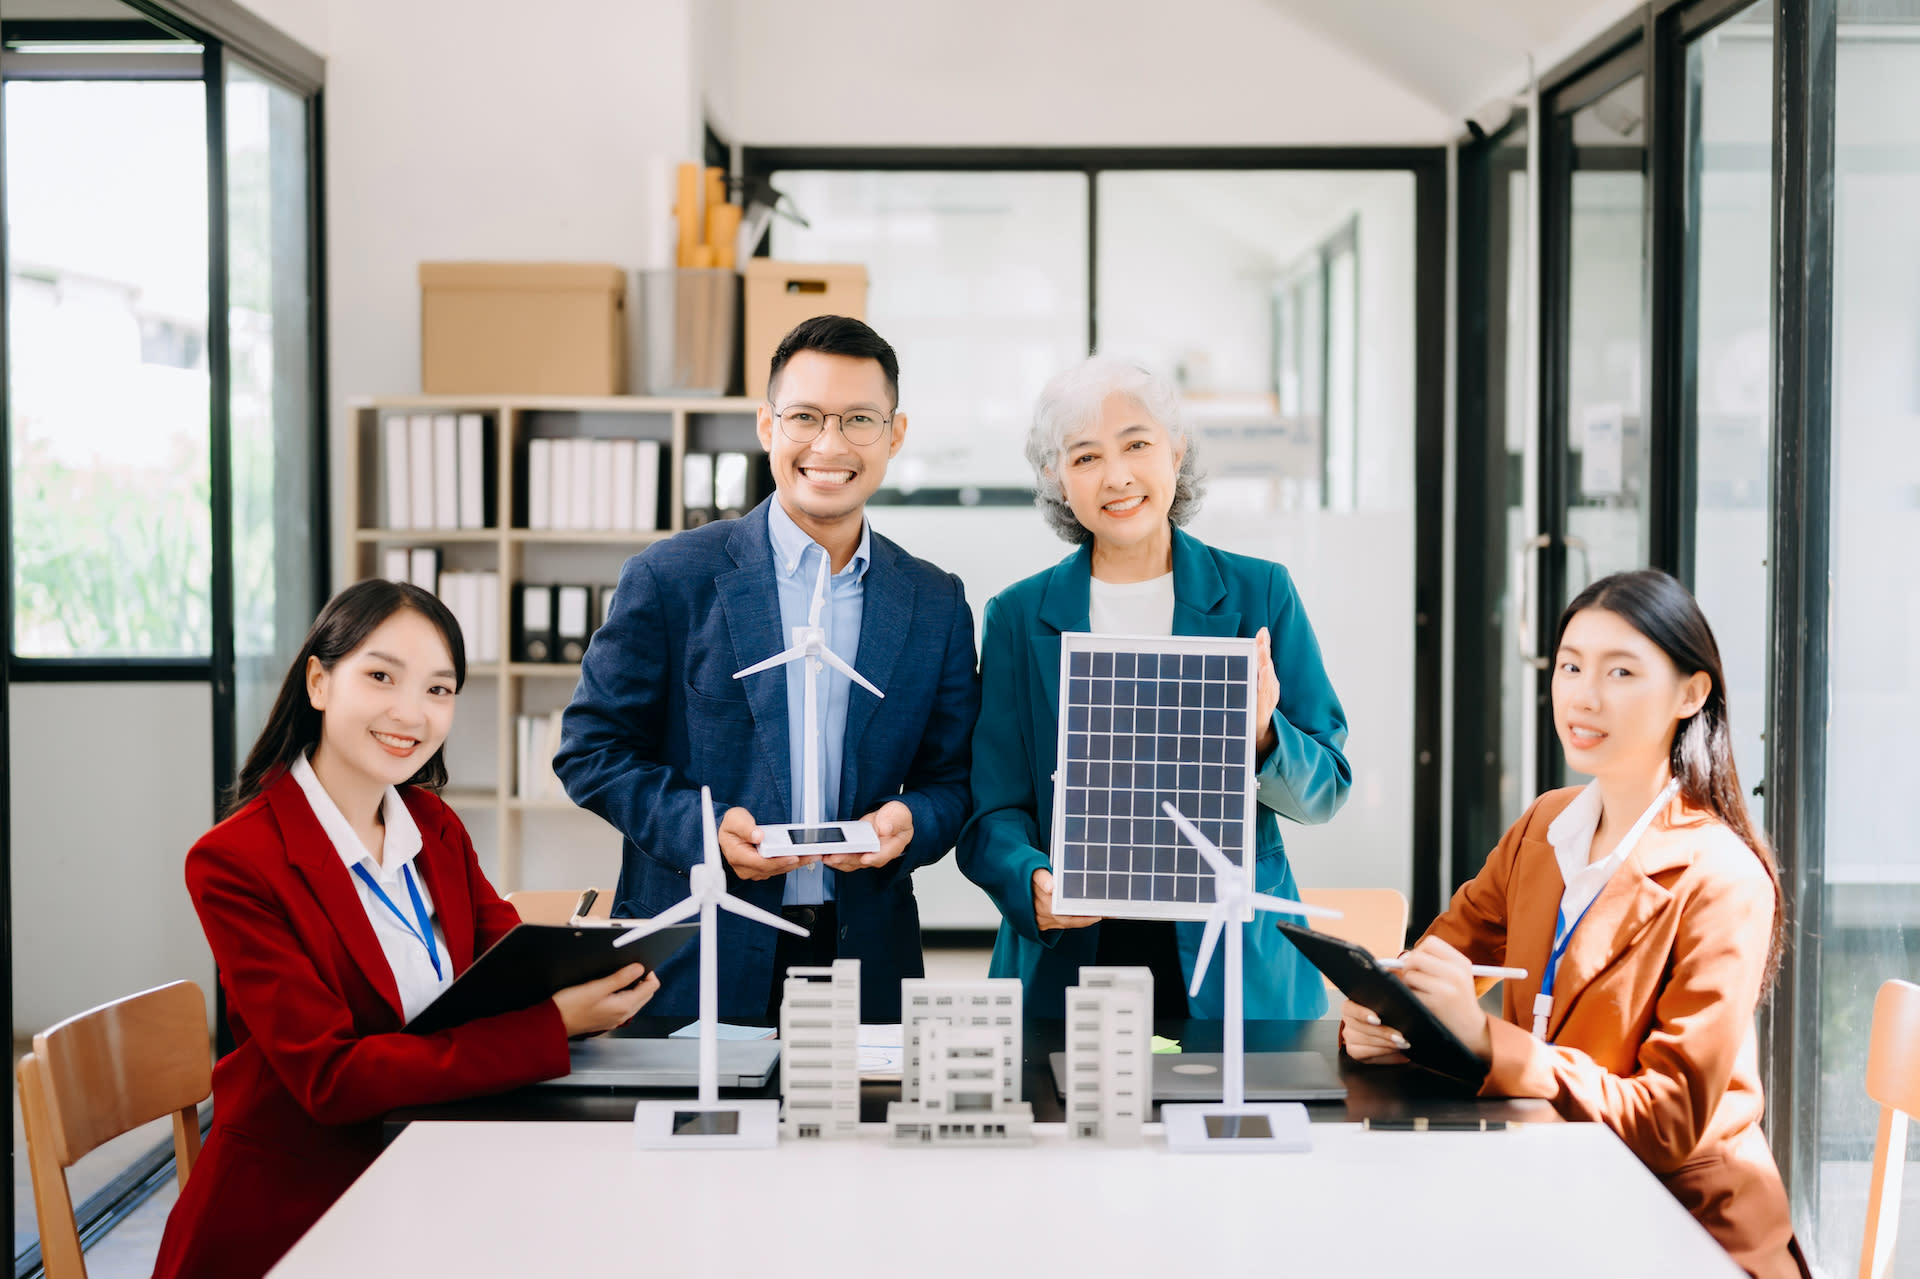 1 man and 3 women in an office showing a renewable energies project